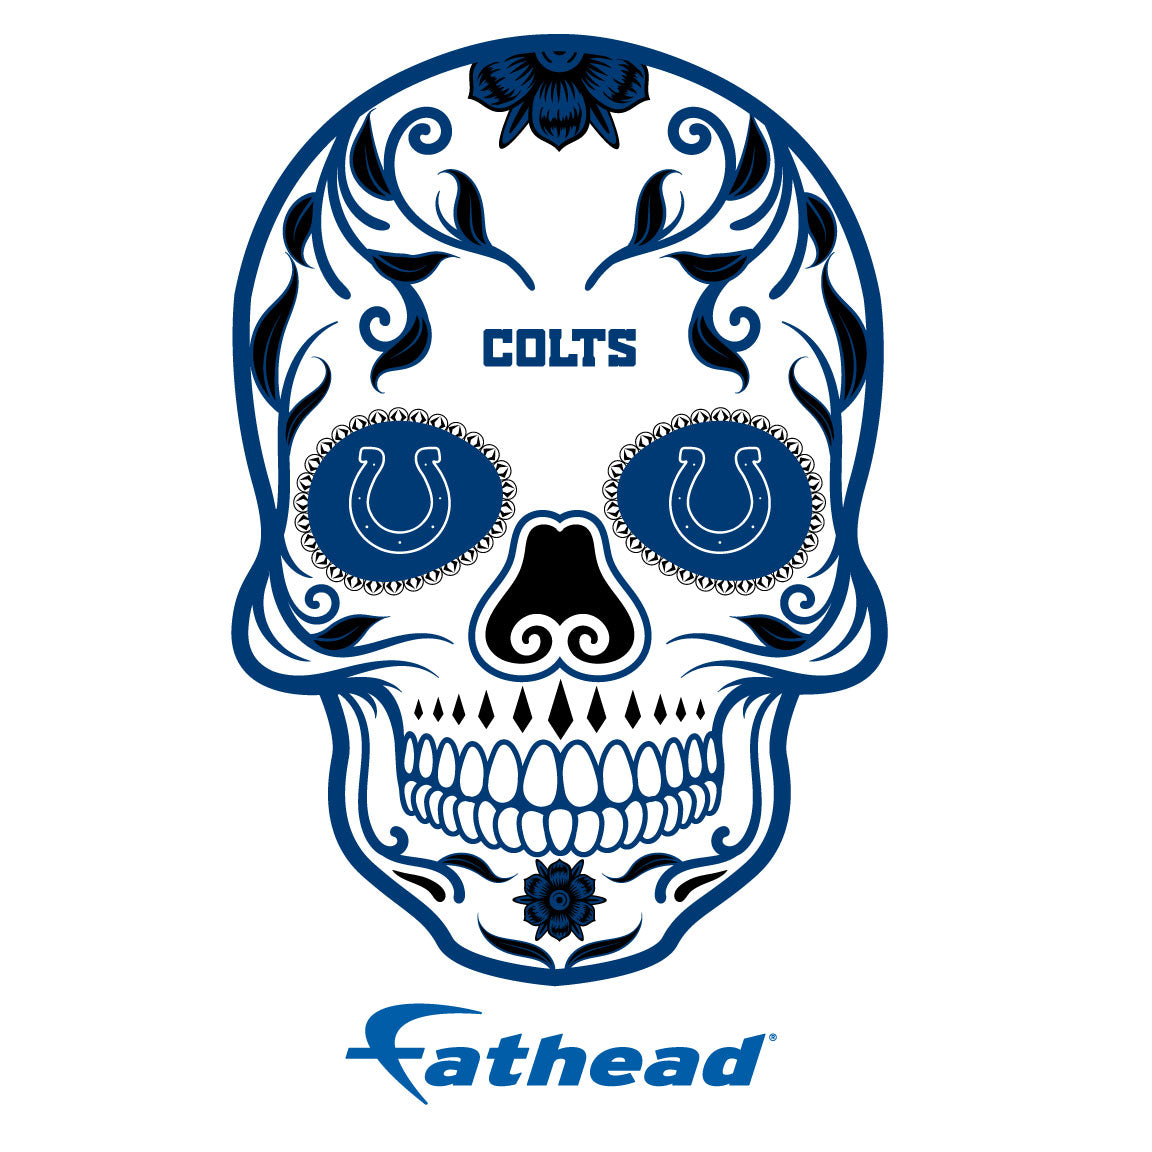 Sheet of 5 -Indianapolis Colts: Skull Minis - Officially Licensed NFL Removable Adhesive Decal